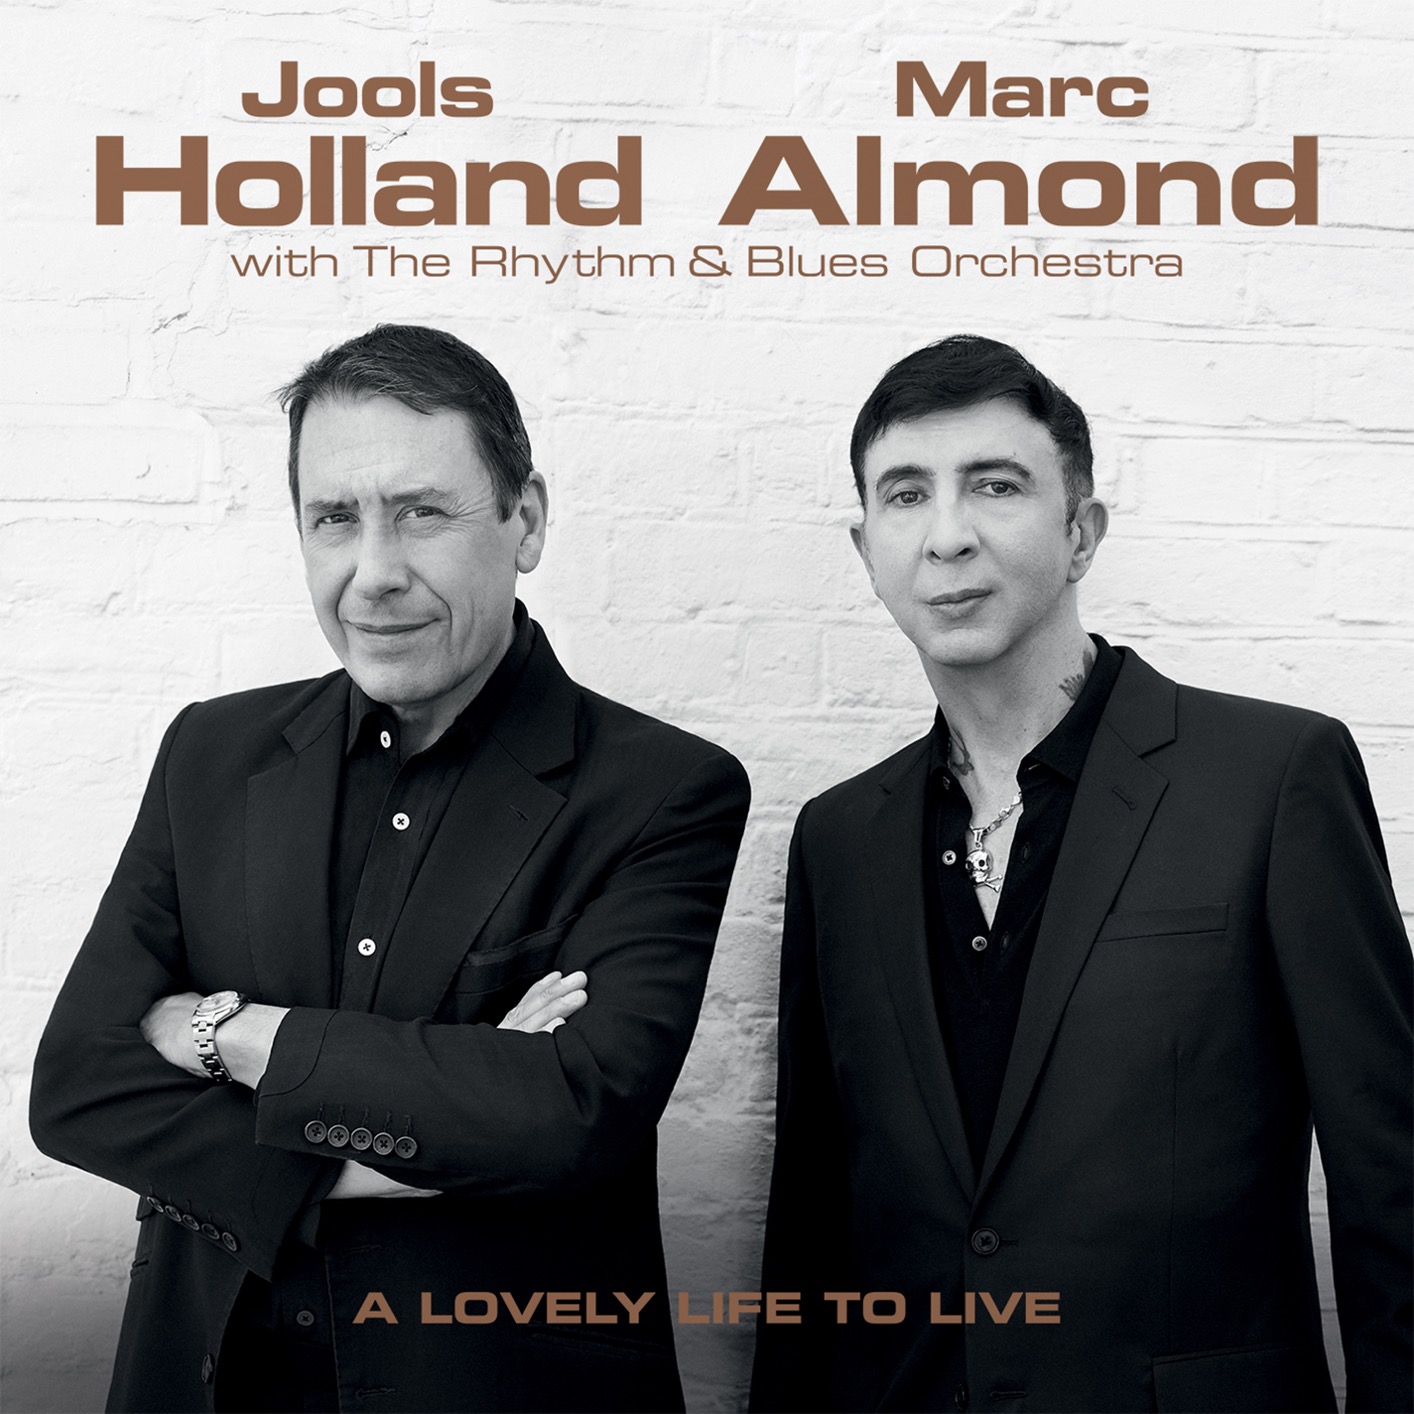 Jools Holland & Marc Almond - A Lovely Life to Live (2018) [FLAC 24bit/96kHz]